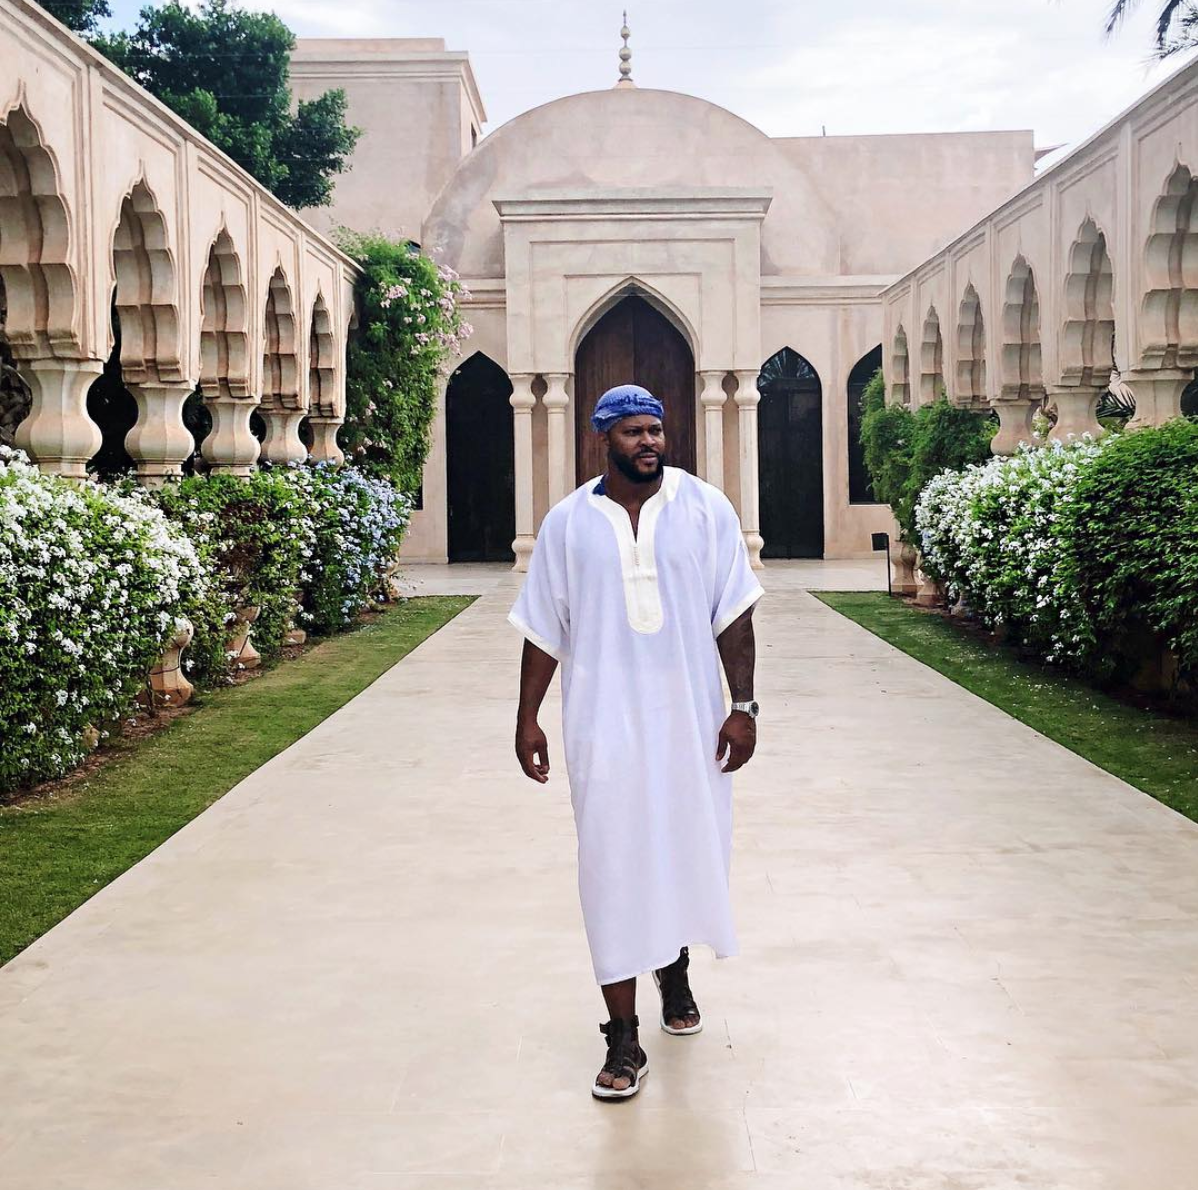 Black Travel Vibes: Live Like Royalty In Marrakech